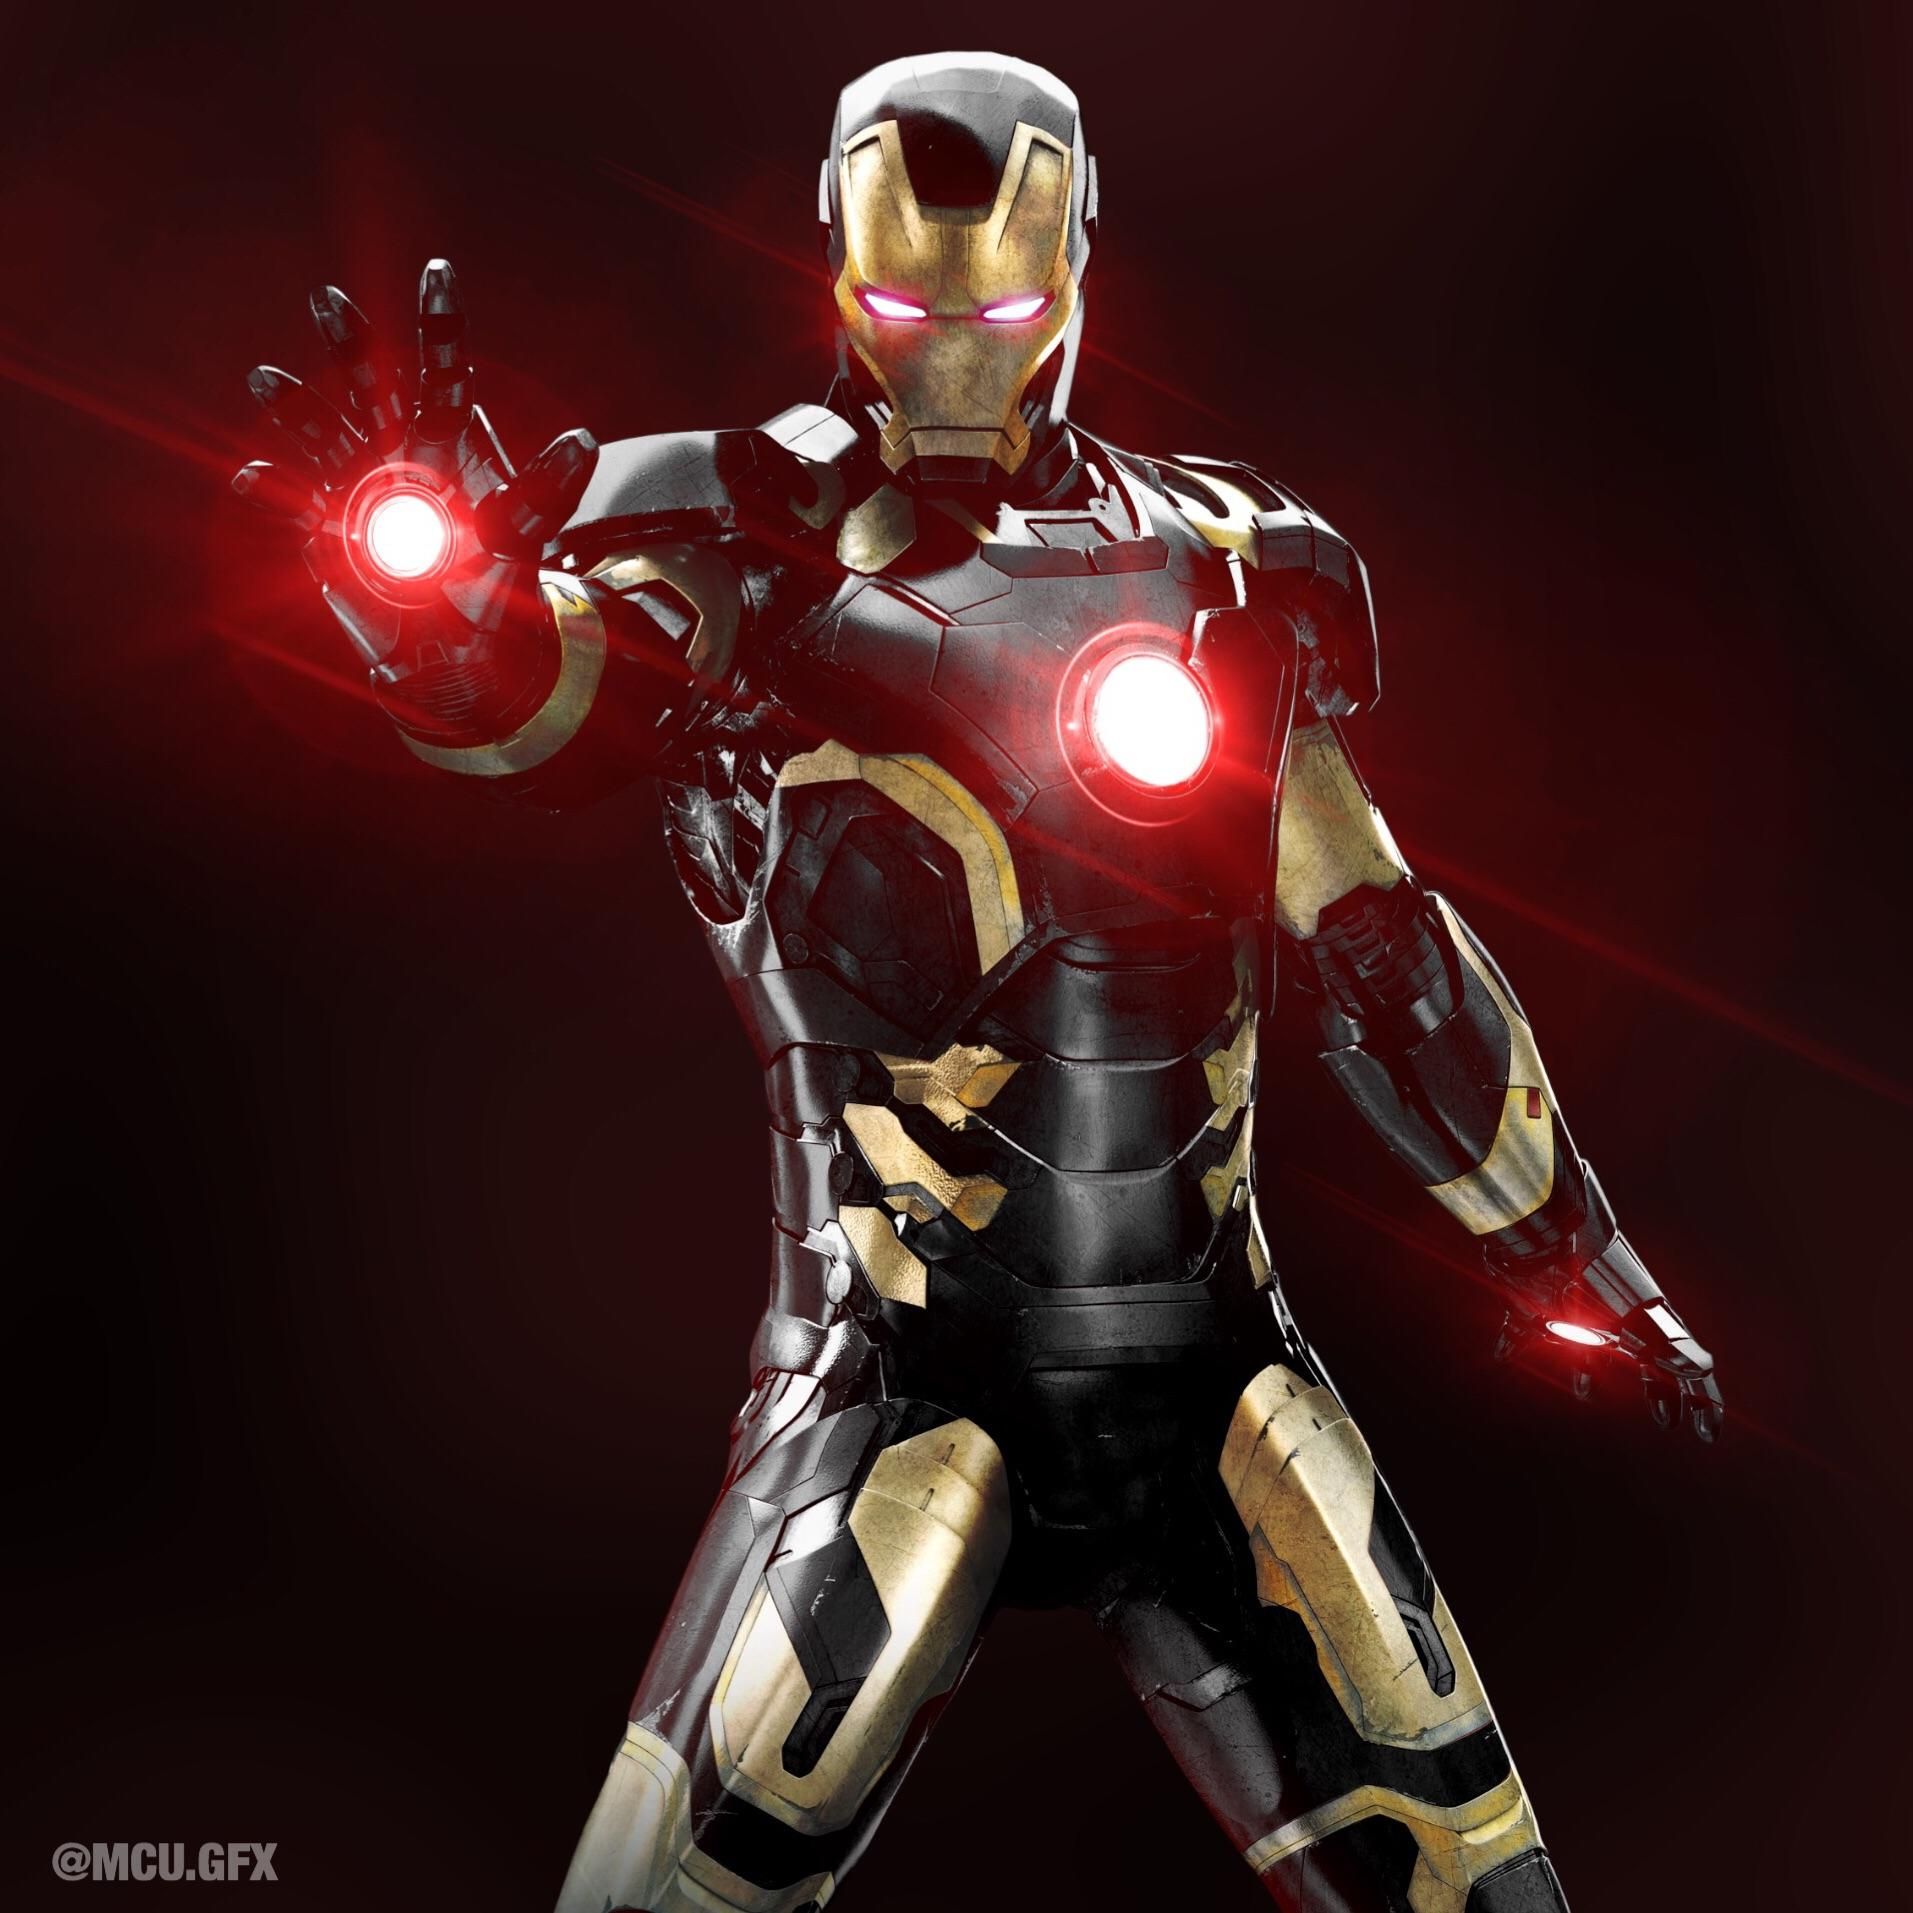 We really needed a Black and Gold Iron Man Suit. Iron man, Iron man suit, Iron man noir